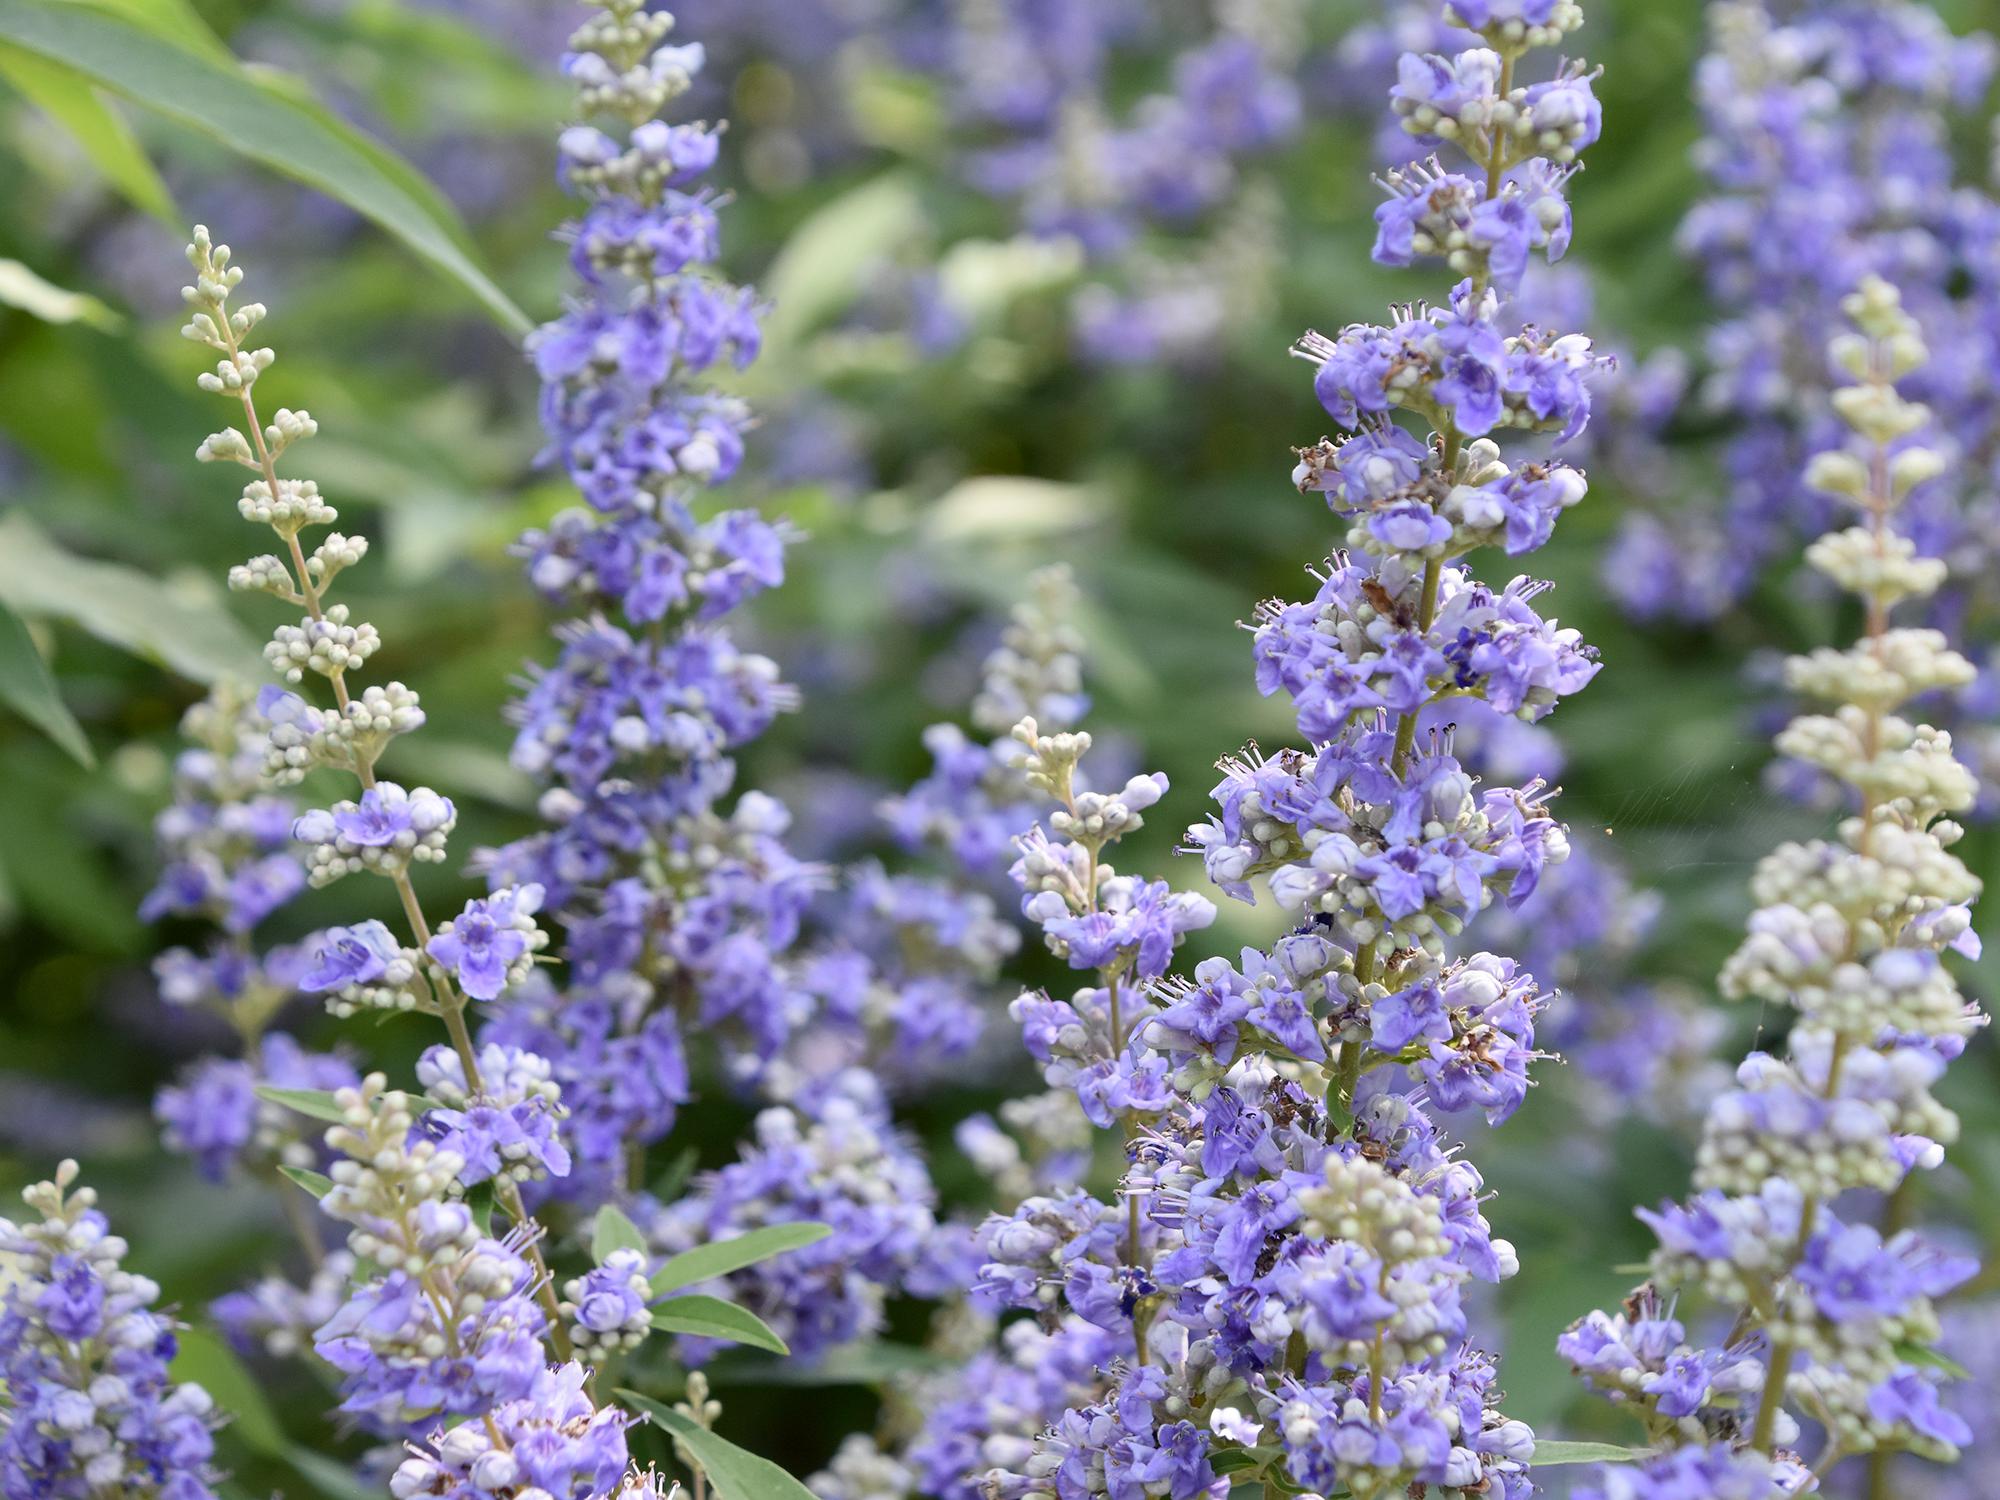 Vitex flower spikes can reach 18 inches long. During the initial flush, the show of flowers may resemble a hazy blue or purplish cloud. (Photo by MSU Extension/Gary Bachman)